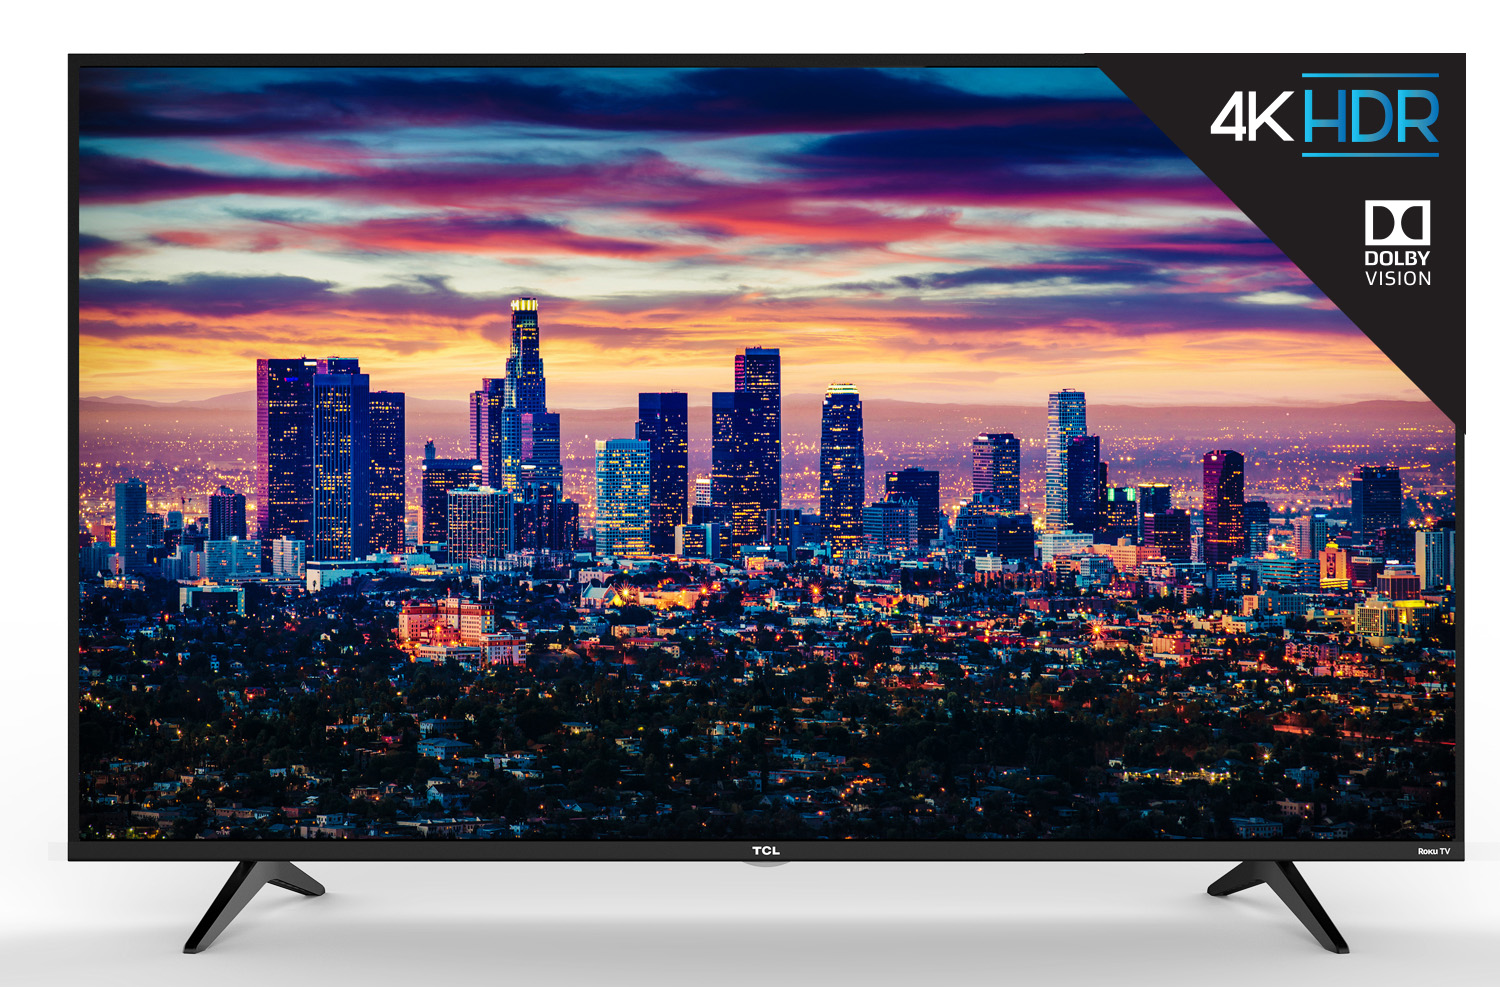 TCL 49" Class 4K Ultra HD (2160p) Dolby Vision HDR Roku Smart LED TV (49S517) - image 1 of 15